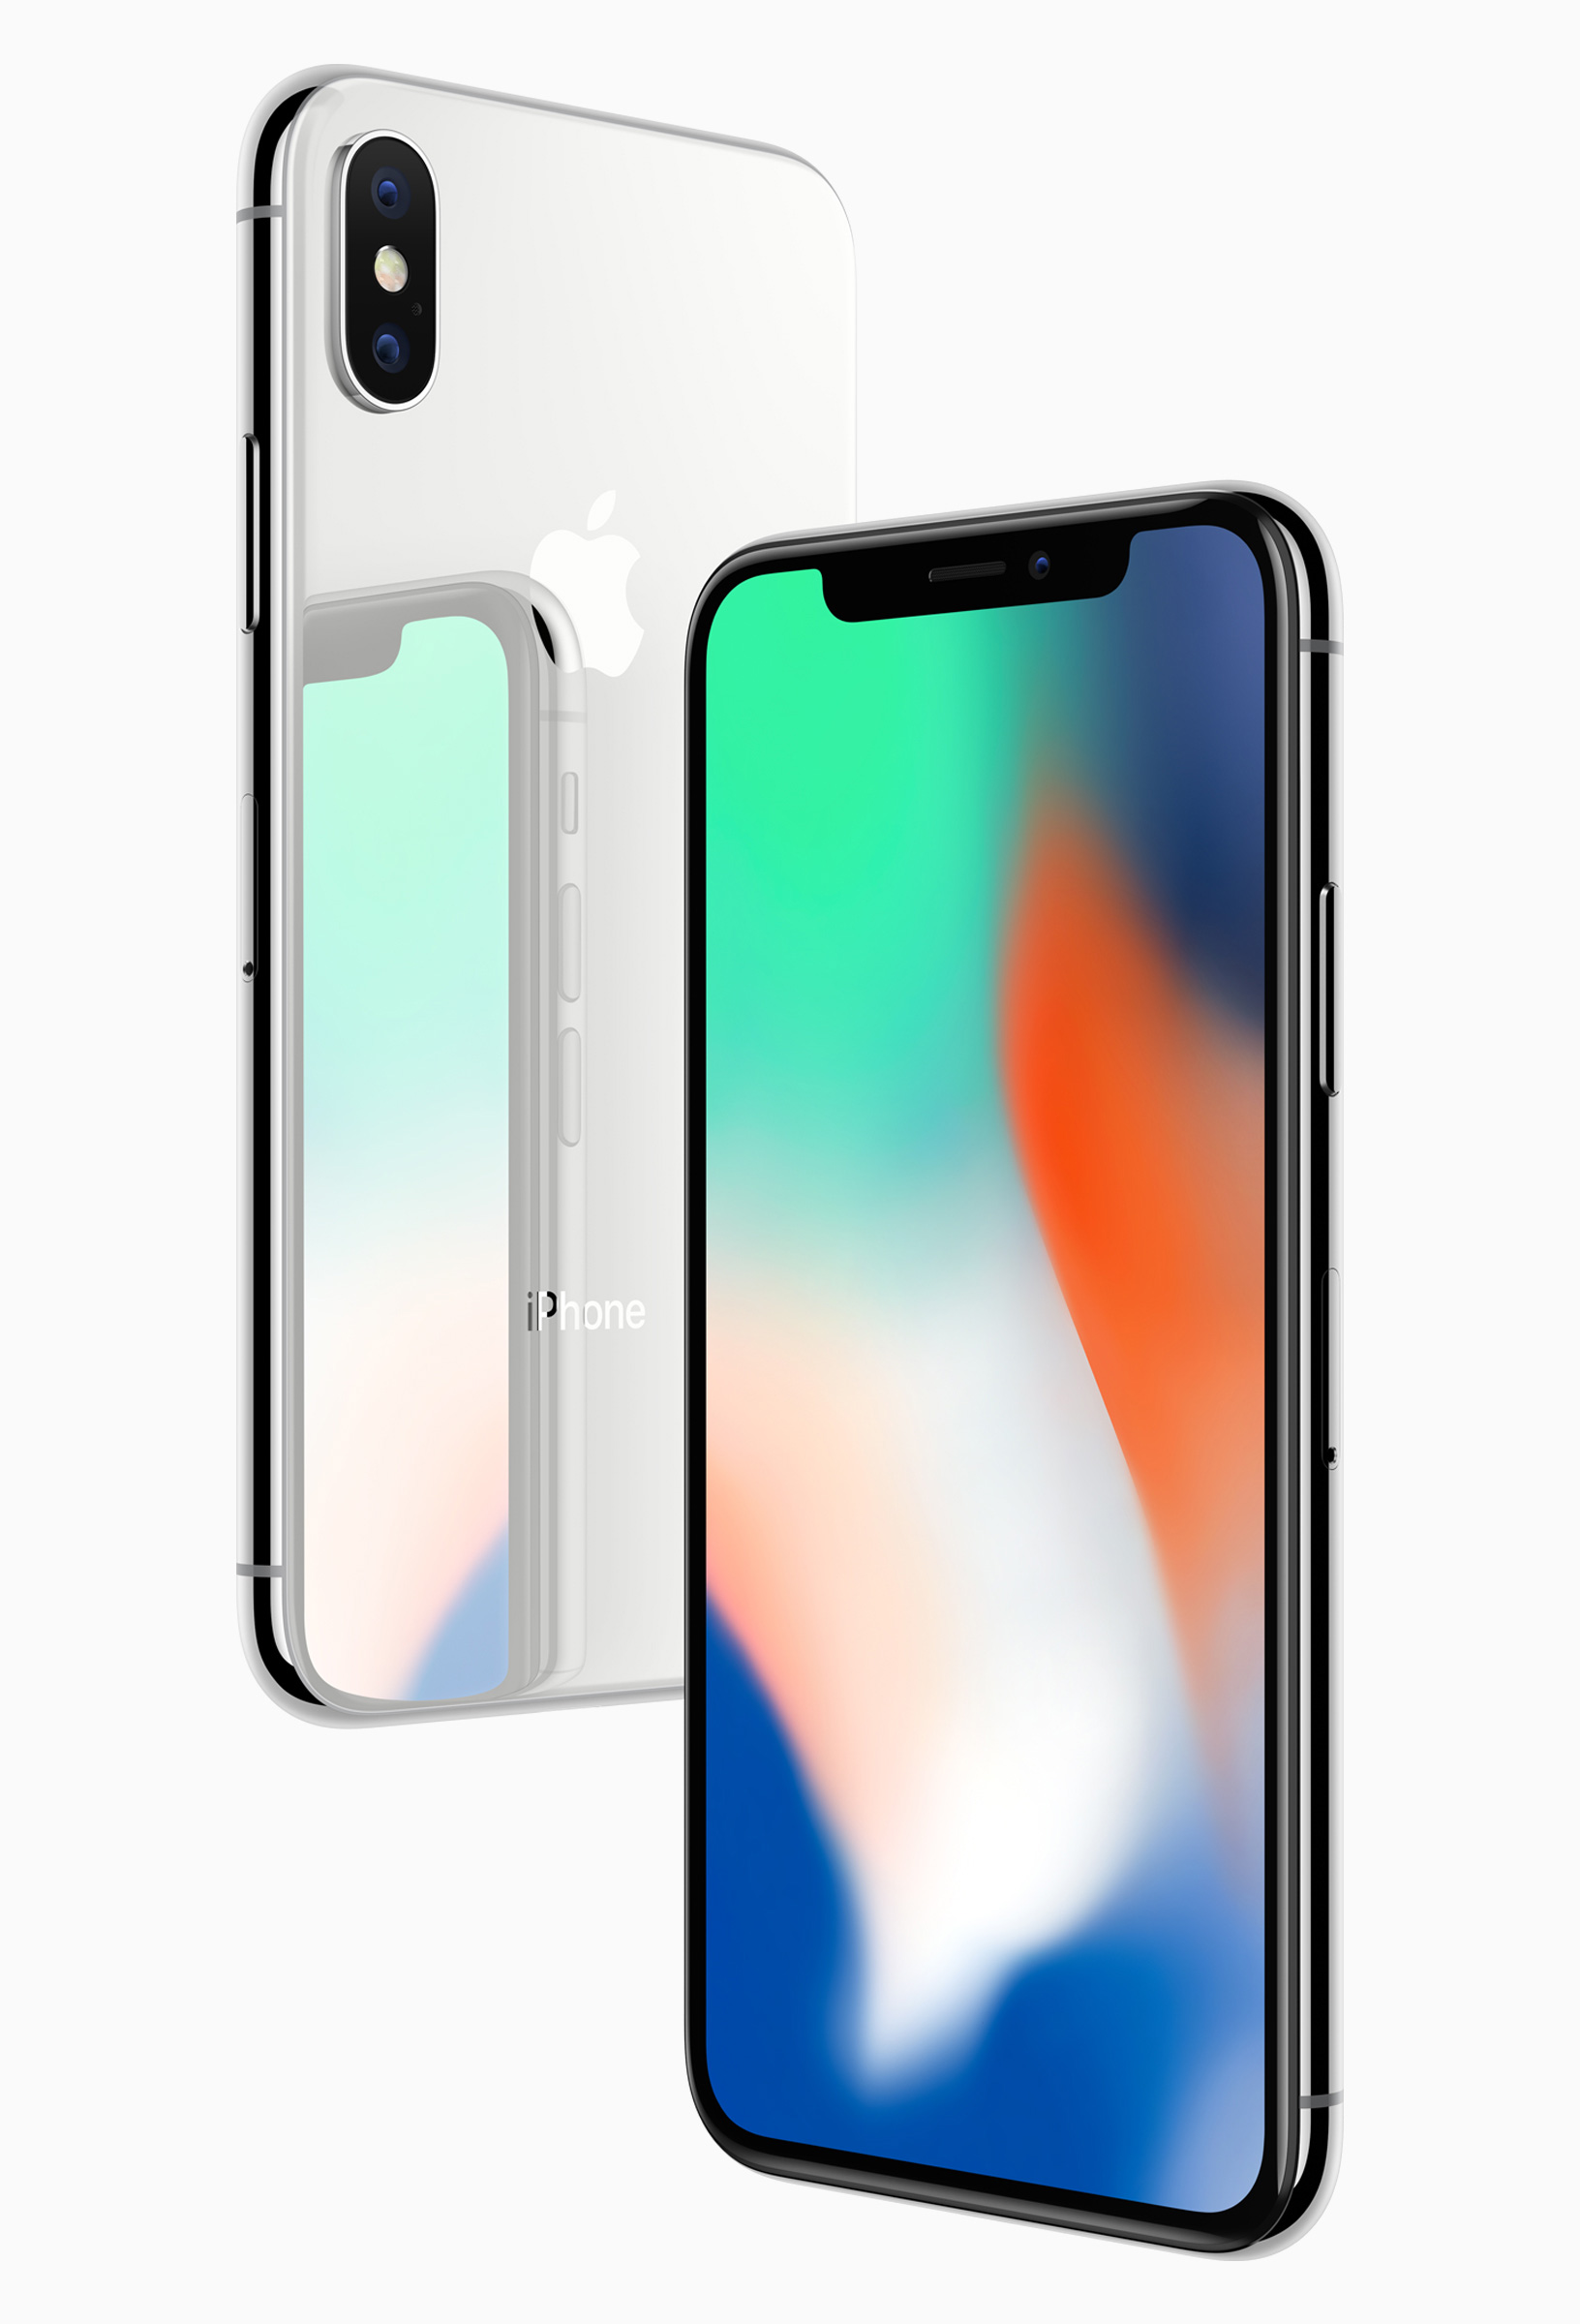 jammer kit autozone parts , iPhone X Features Face ID, Edge-to-Edge Screen